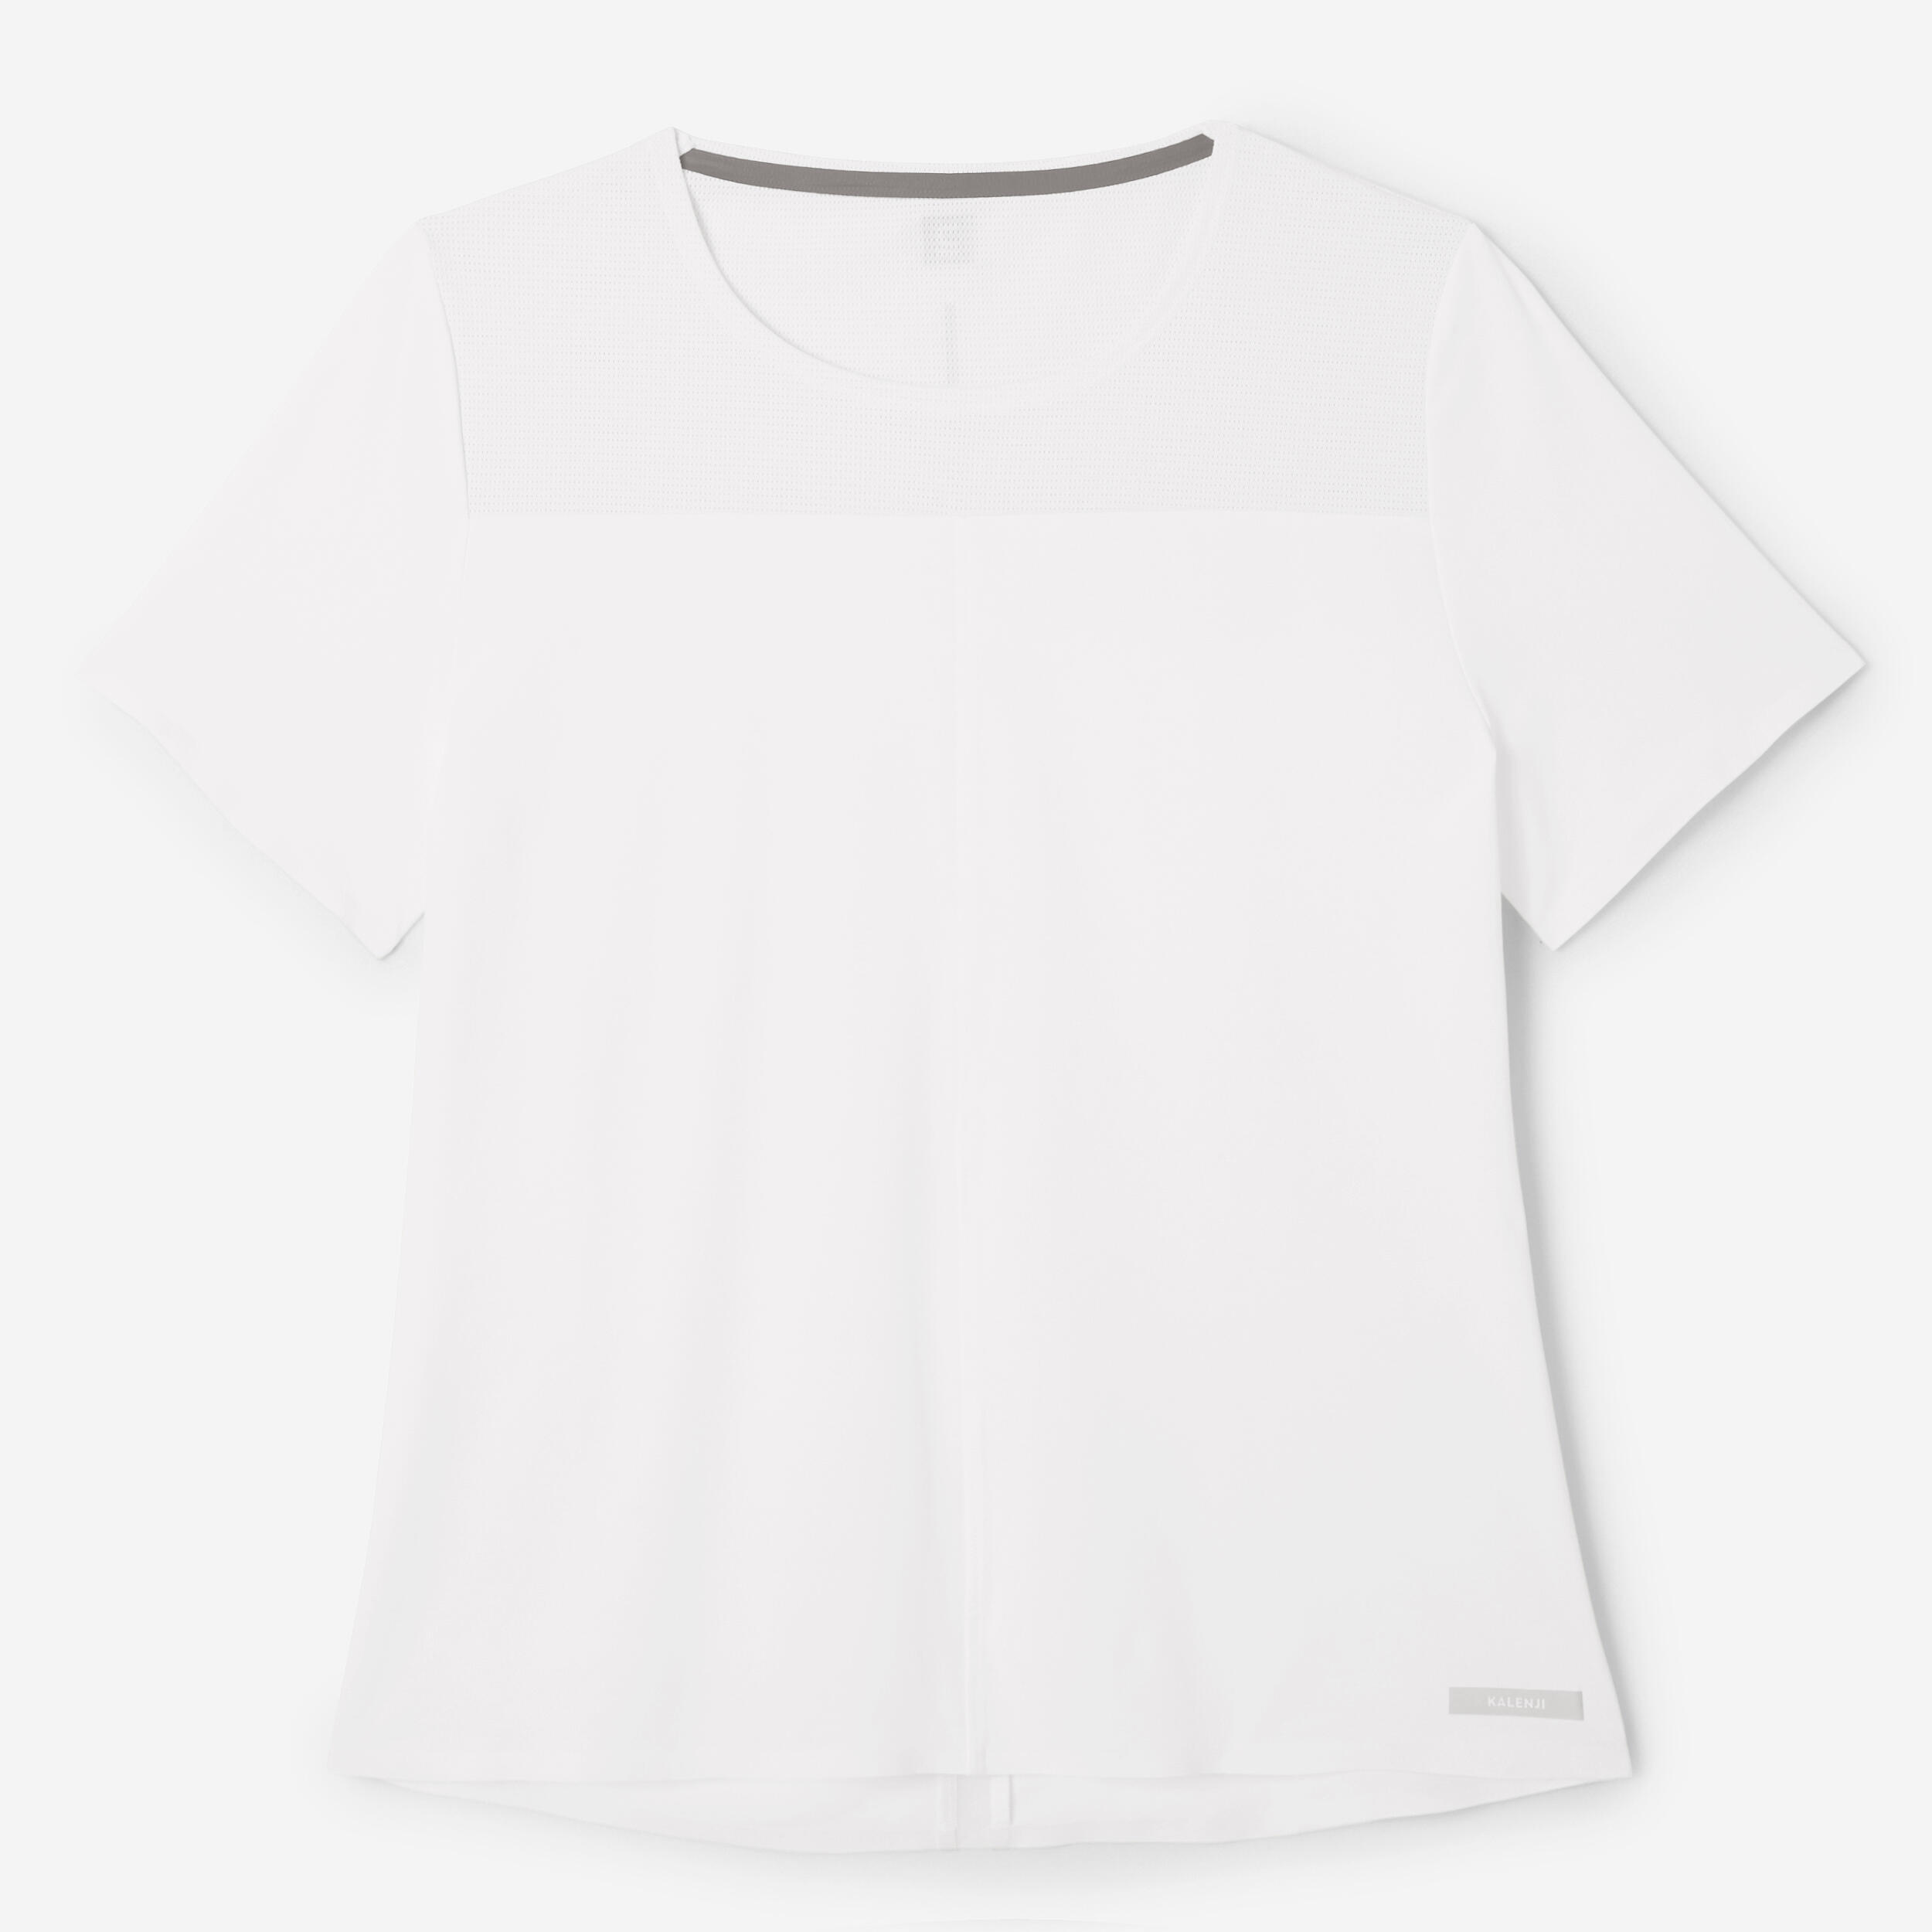 Refurbished Womens breathable running T-shirt Dry+ Breath - white - A Grade 1/7